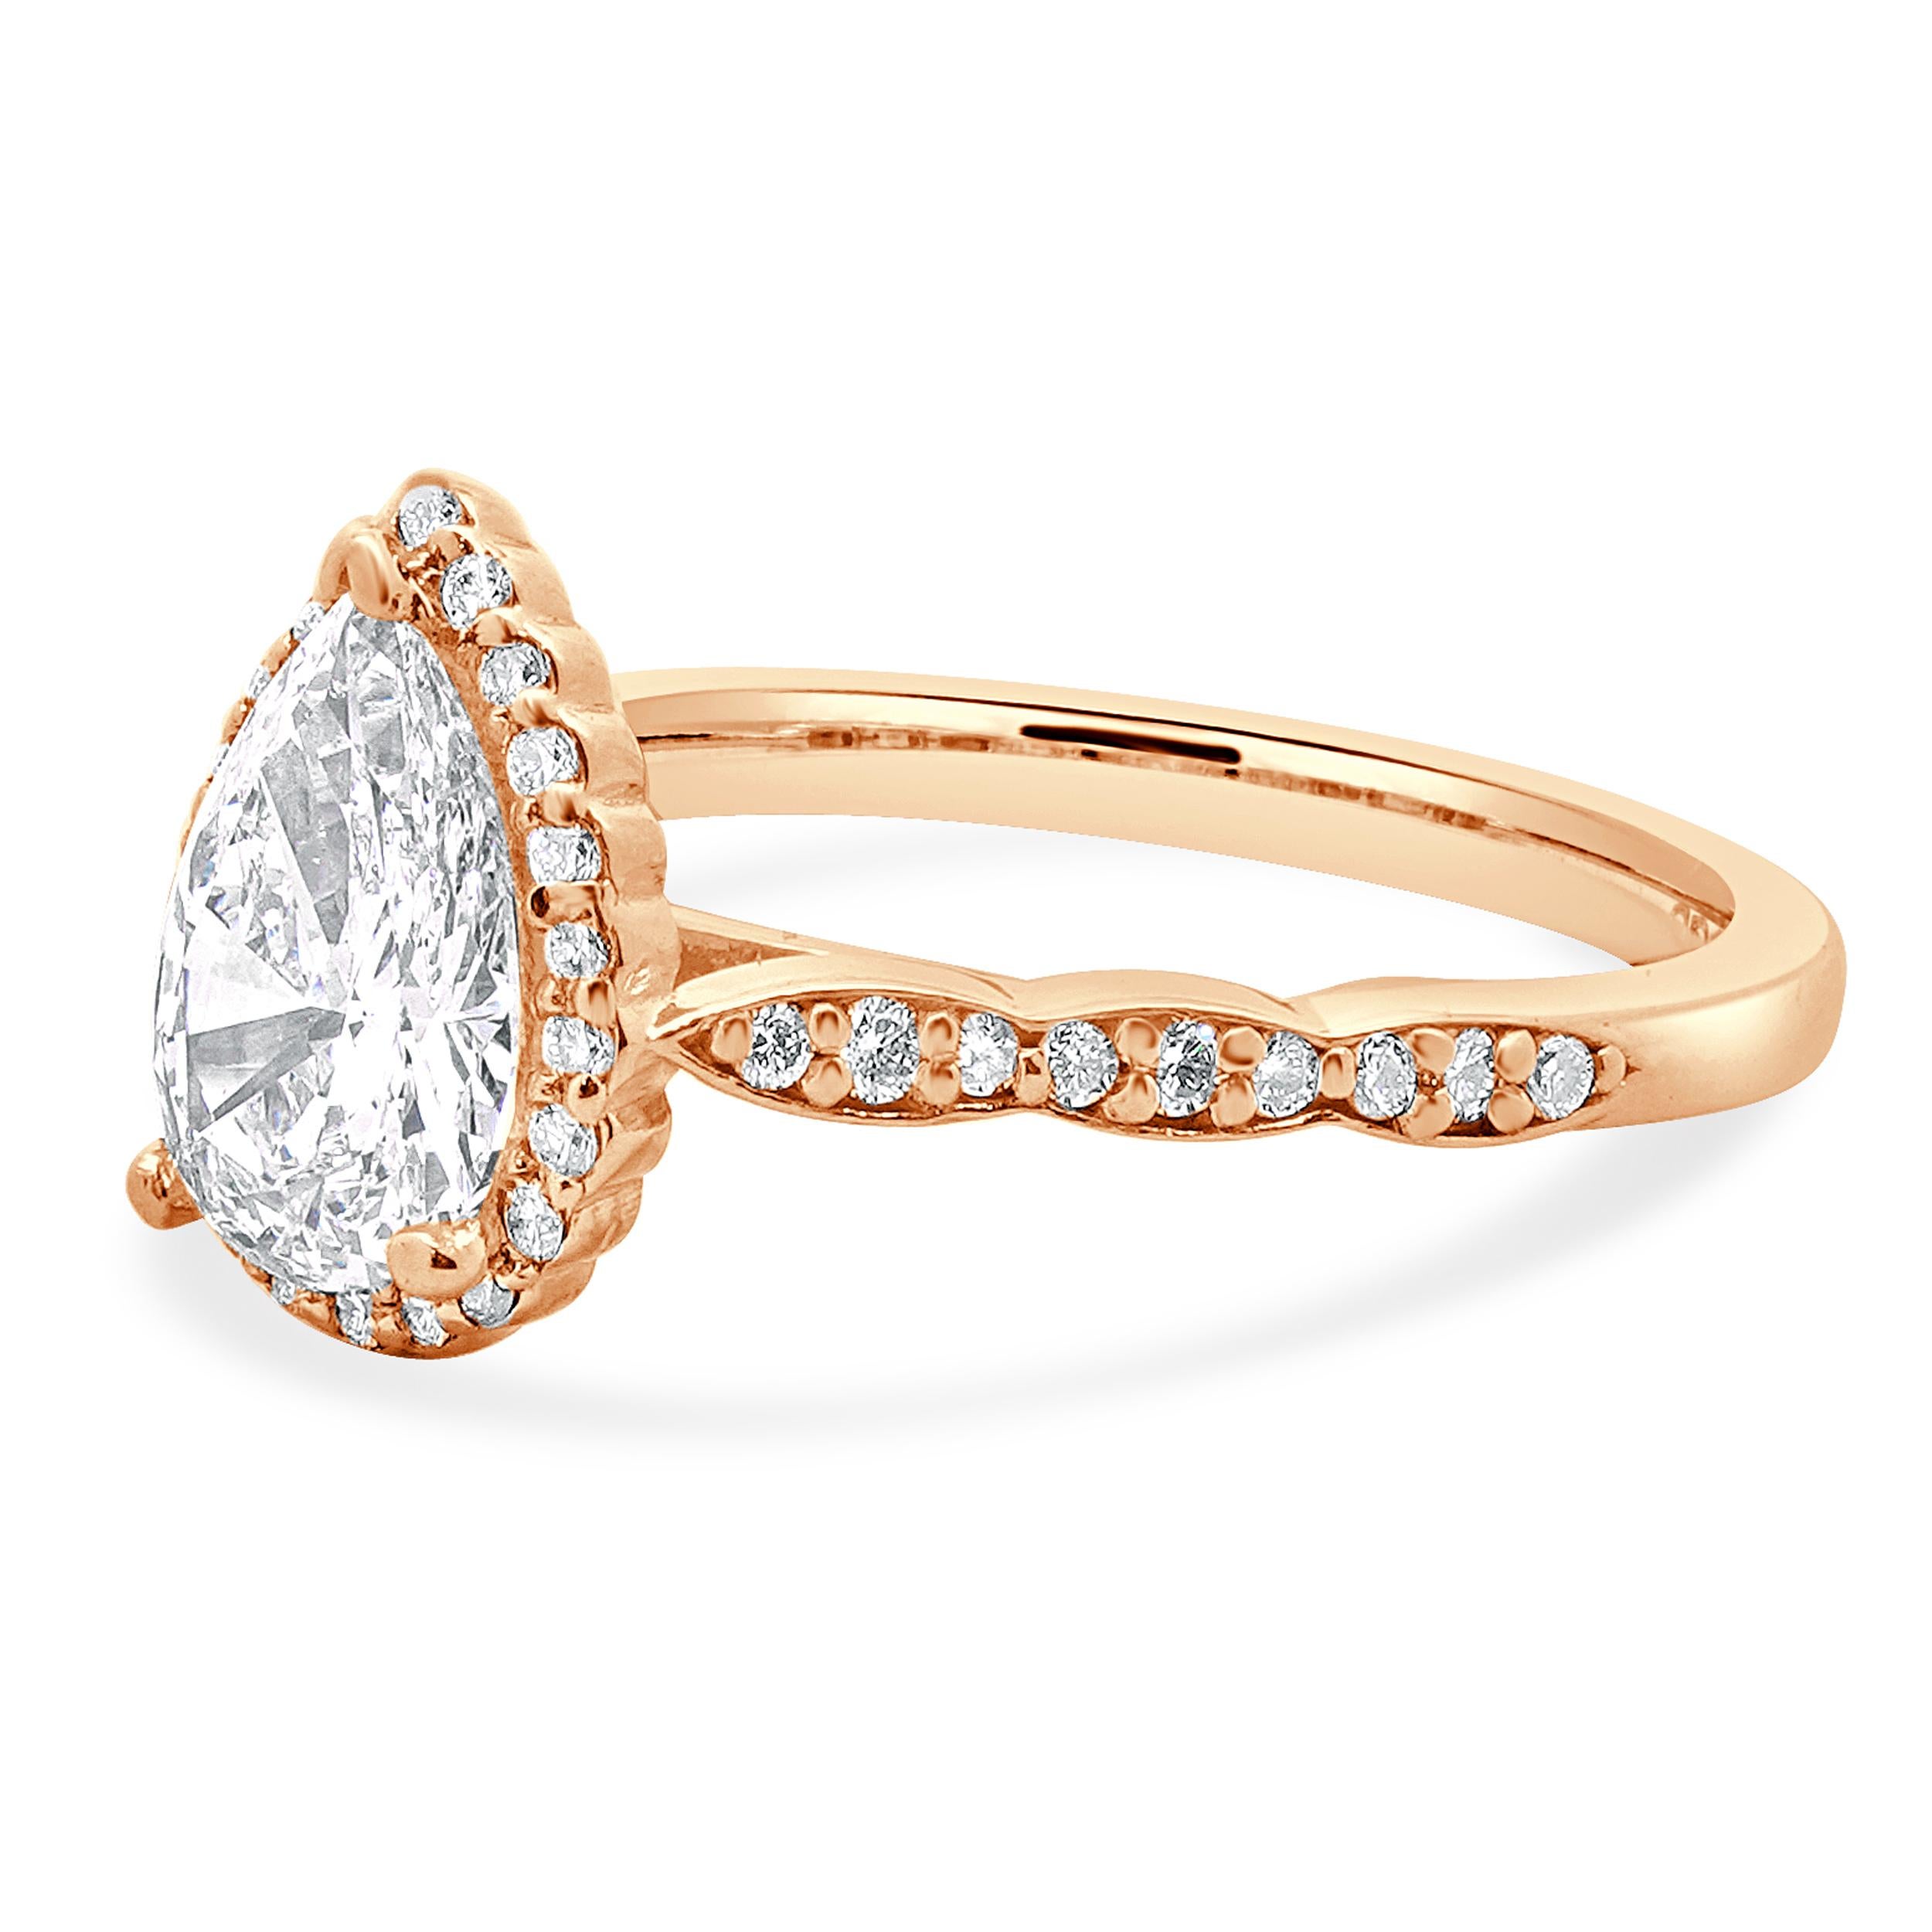 Designer: custom
Material: 14K rose gold
Diamond: 1 pear cut = 1.07ct
Color: H
Clarity: VS2
Diamond: 38 round brilliant = 0.38cttw
Color: H
Clarity: SI1
Ring Size: 5.0 (complimentary sizing available)
Weight: 2.99 grams
